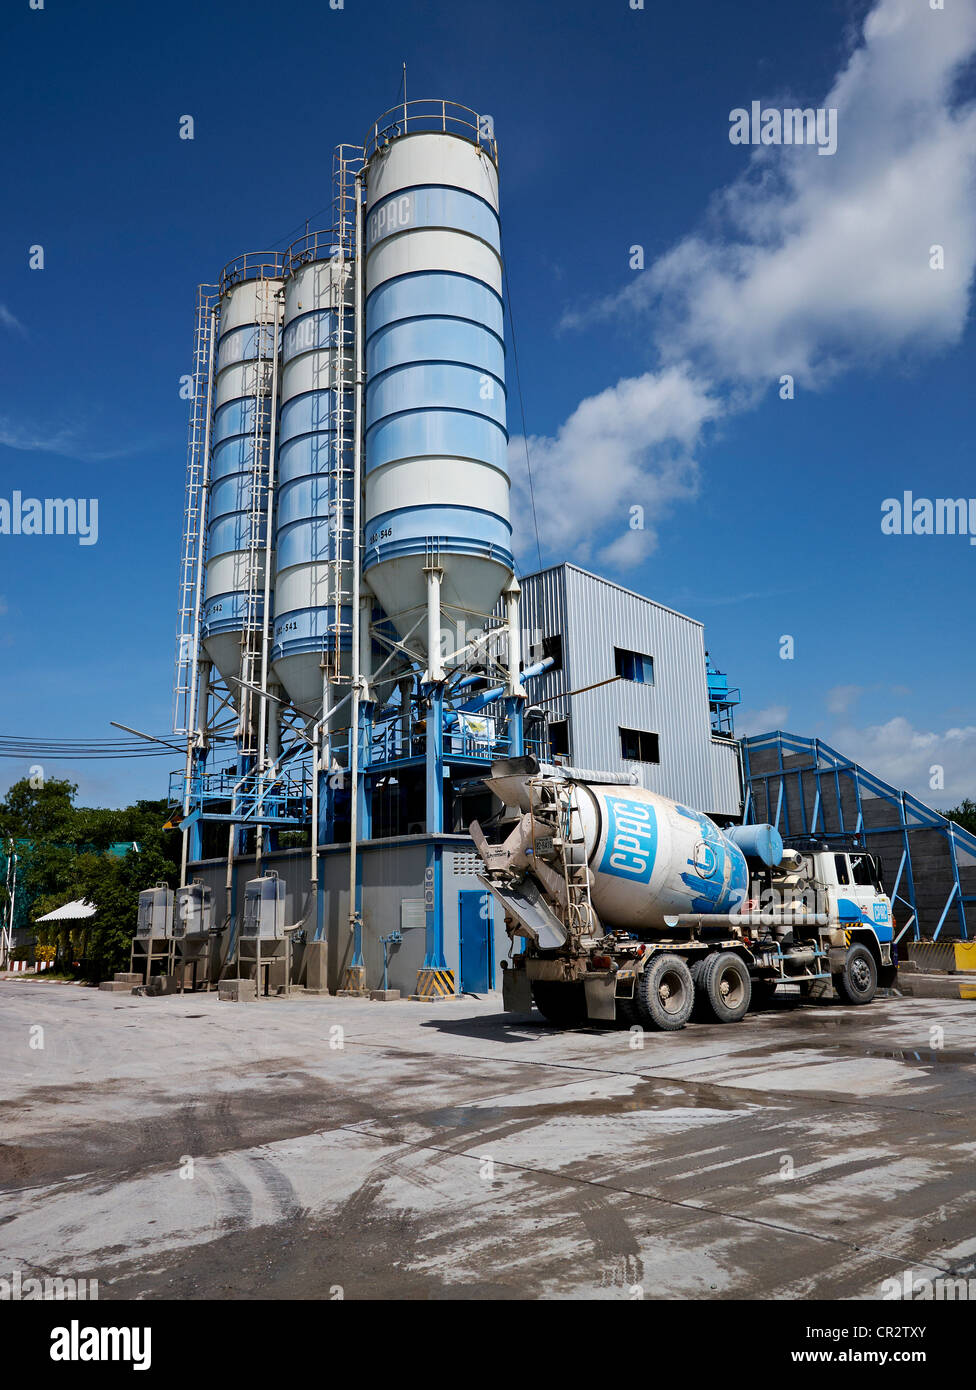 Cement production plant in Thailand Stock Photo: 48621299 - Alamy